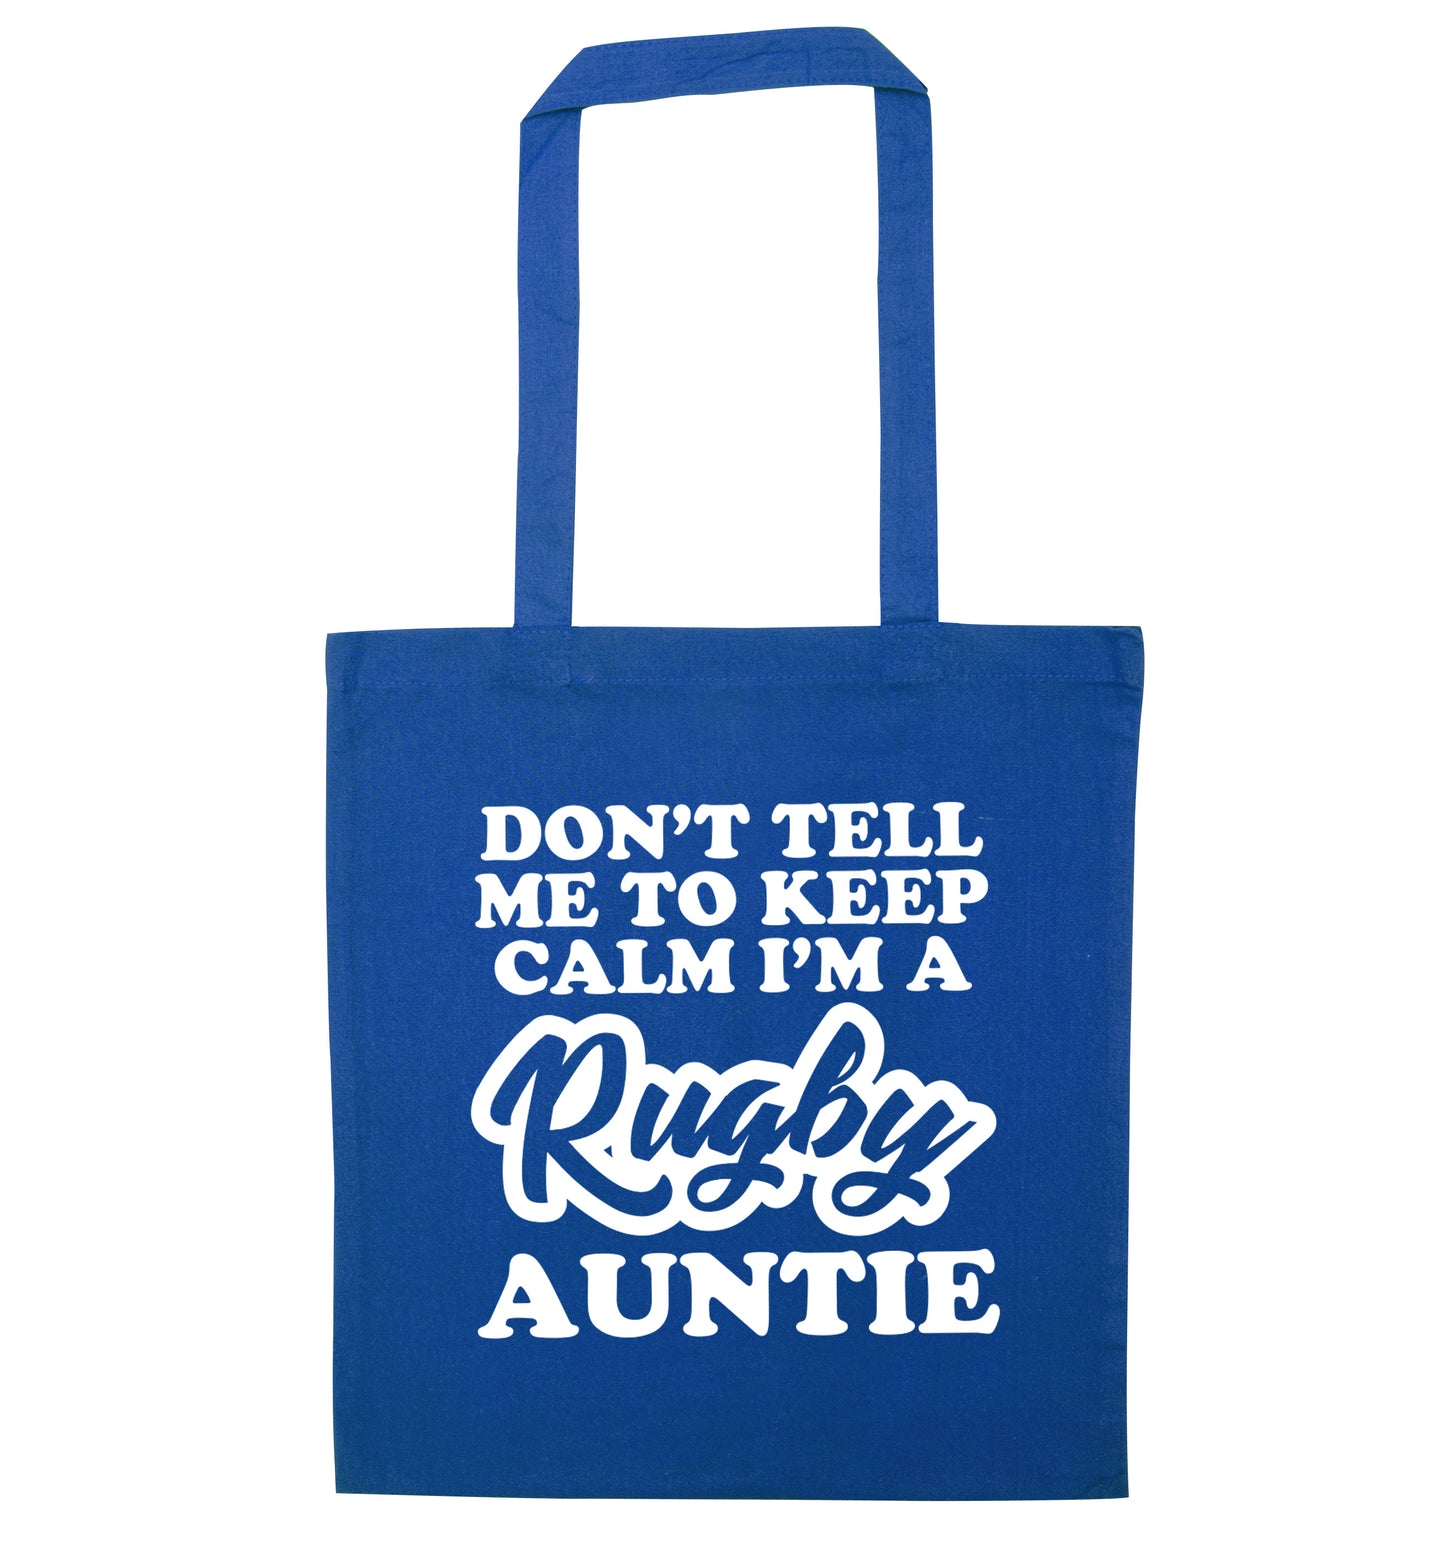 Don't tell me keep calm I'm a rugby auntie blue tote bag